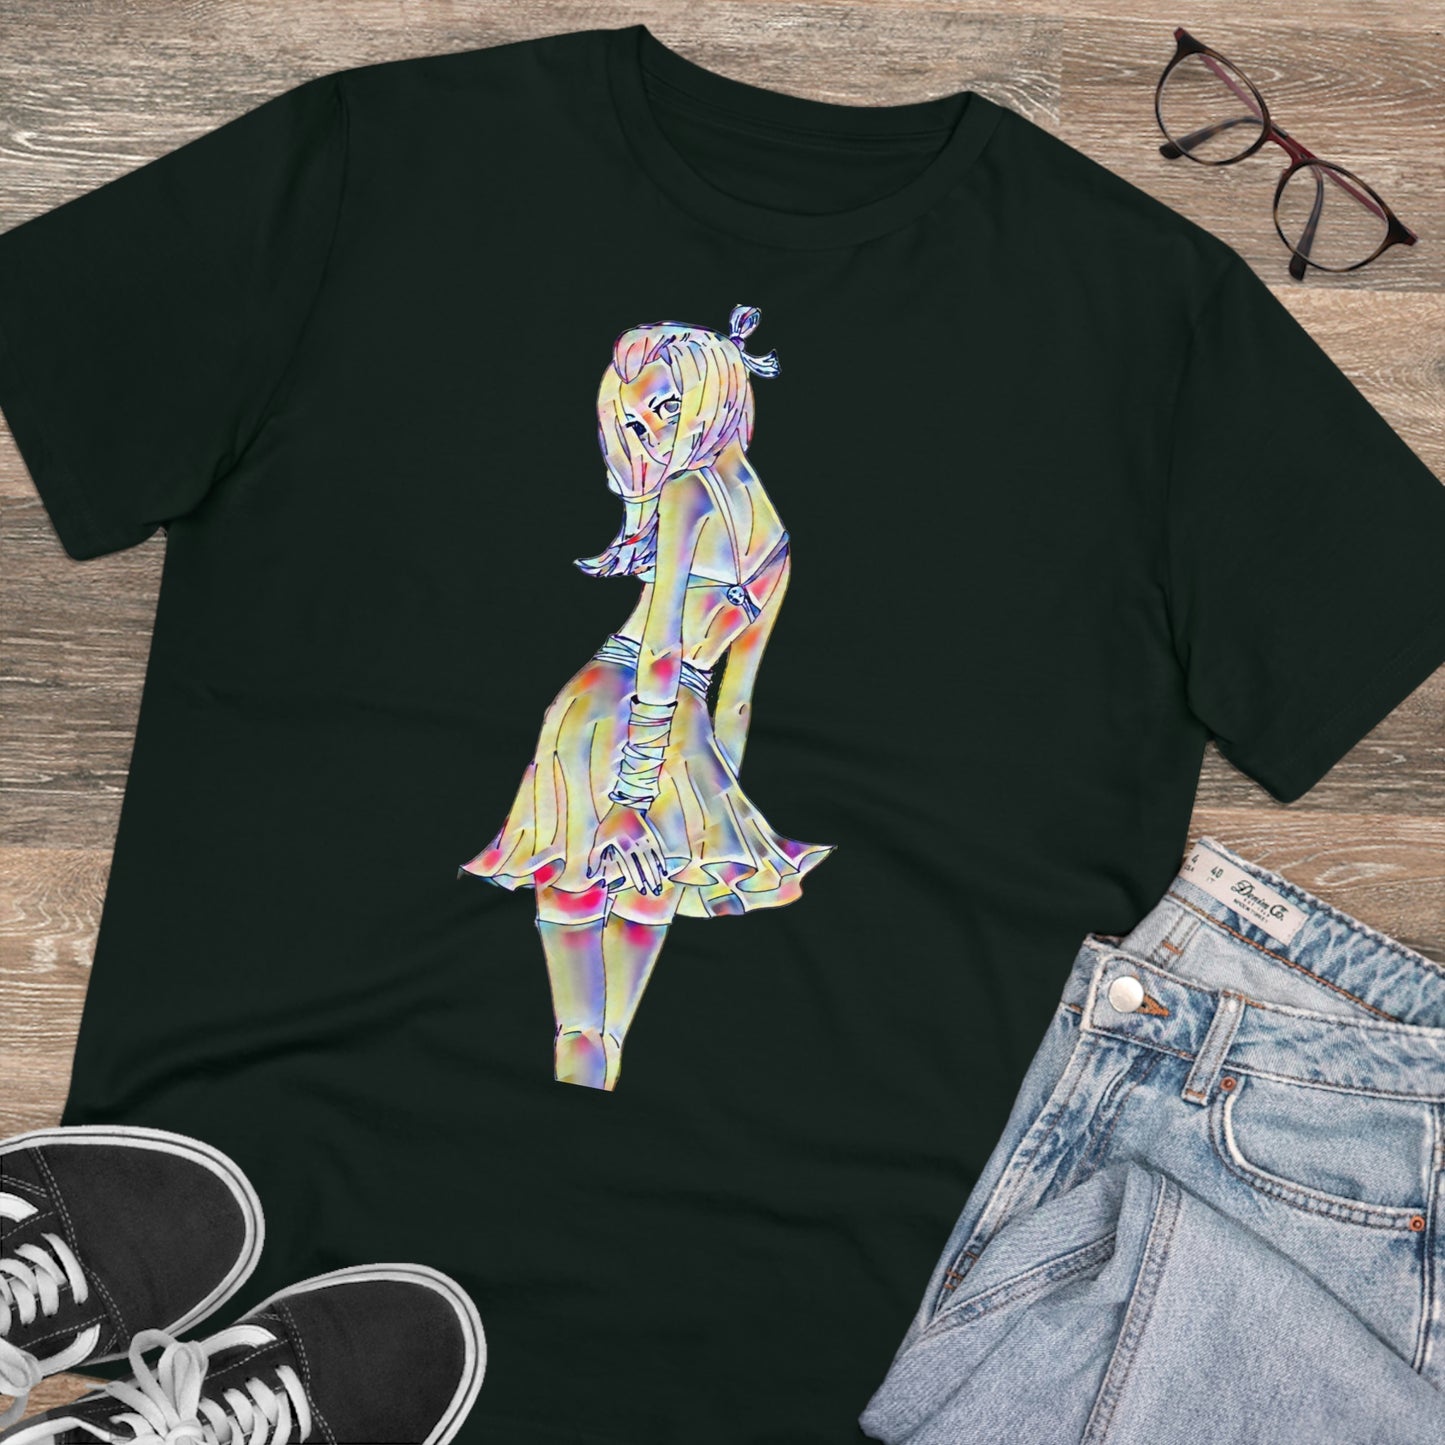 Anime Collection - Organic Creator T-shirt - Looking Back